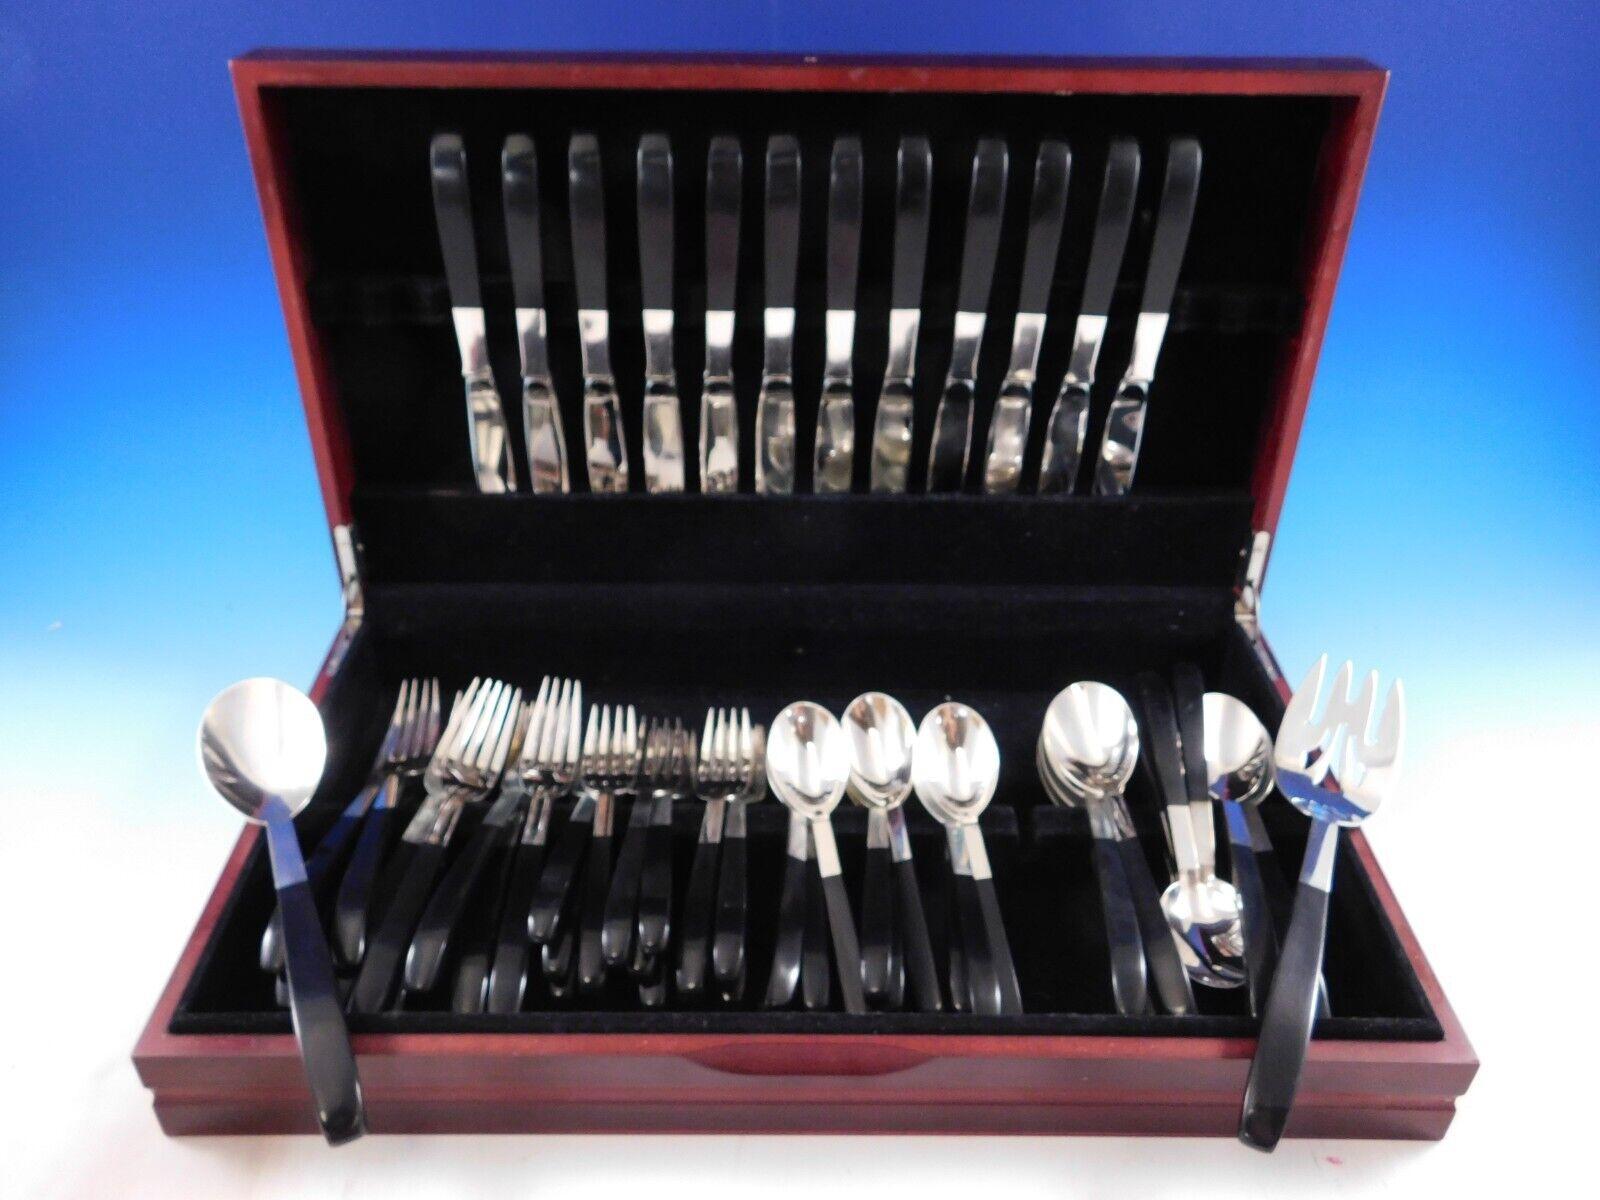 Mid-Century Modern CONTRAST BY LUNT sterling silver with nylon handle Flatware set, designed by Nord Bowlen of Greenfeld, MA in 1956 - 62 pieces. This set includes:


12 Knives, 9 3/8